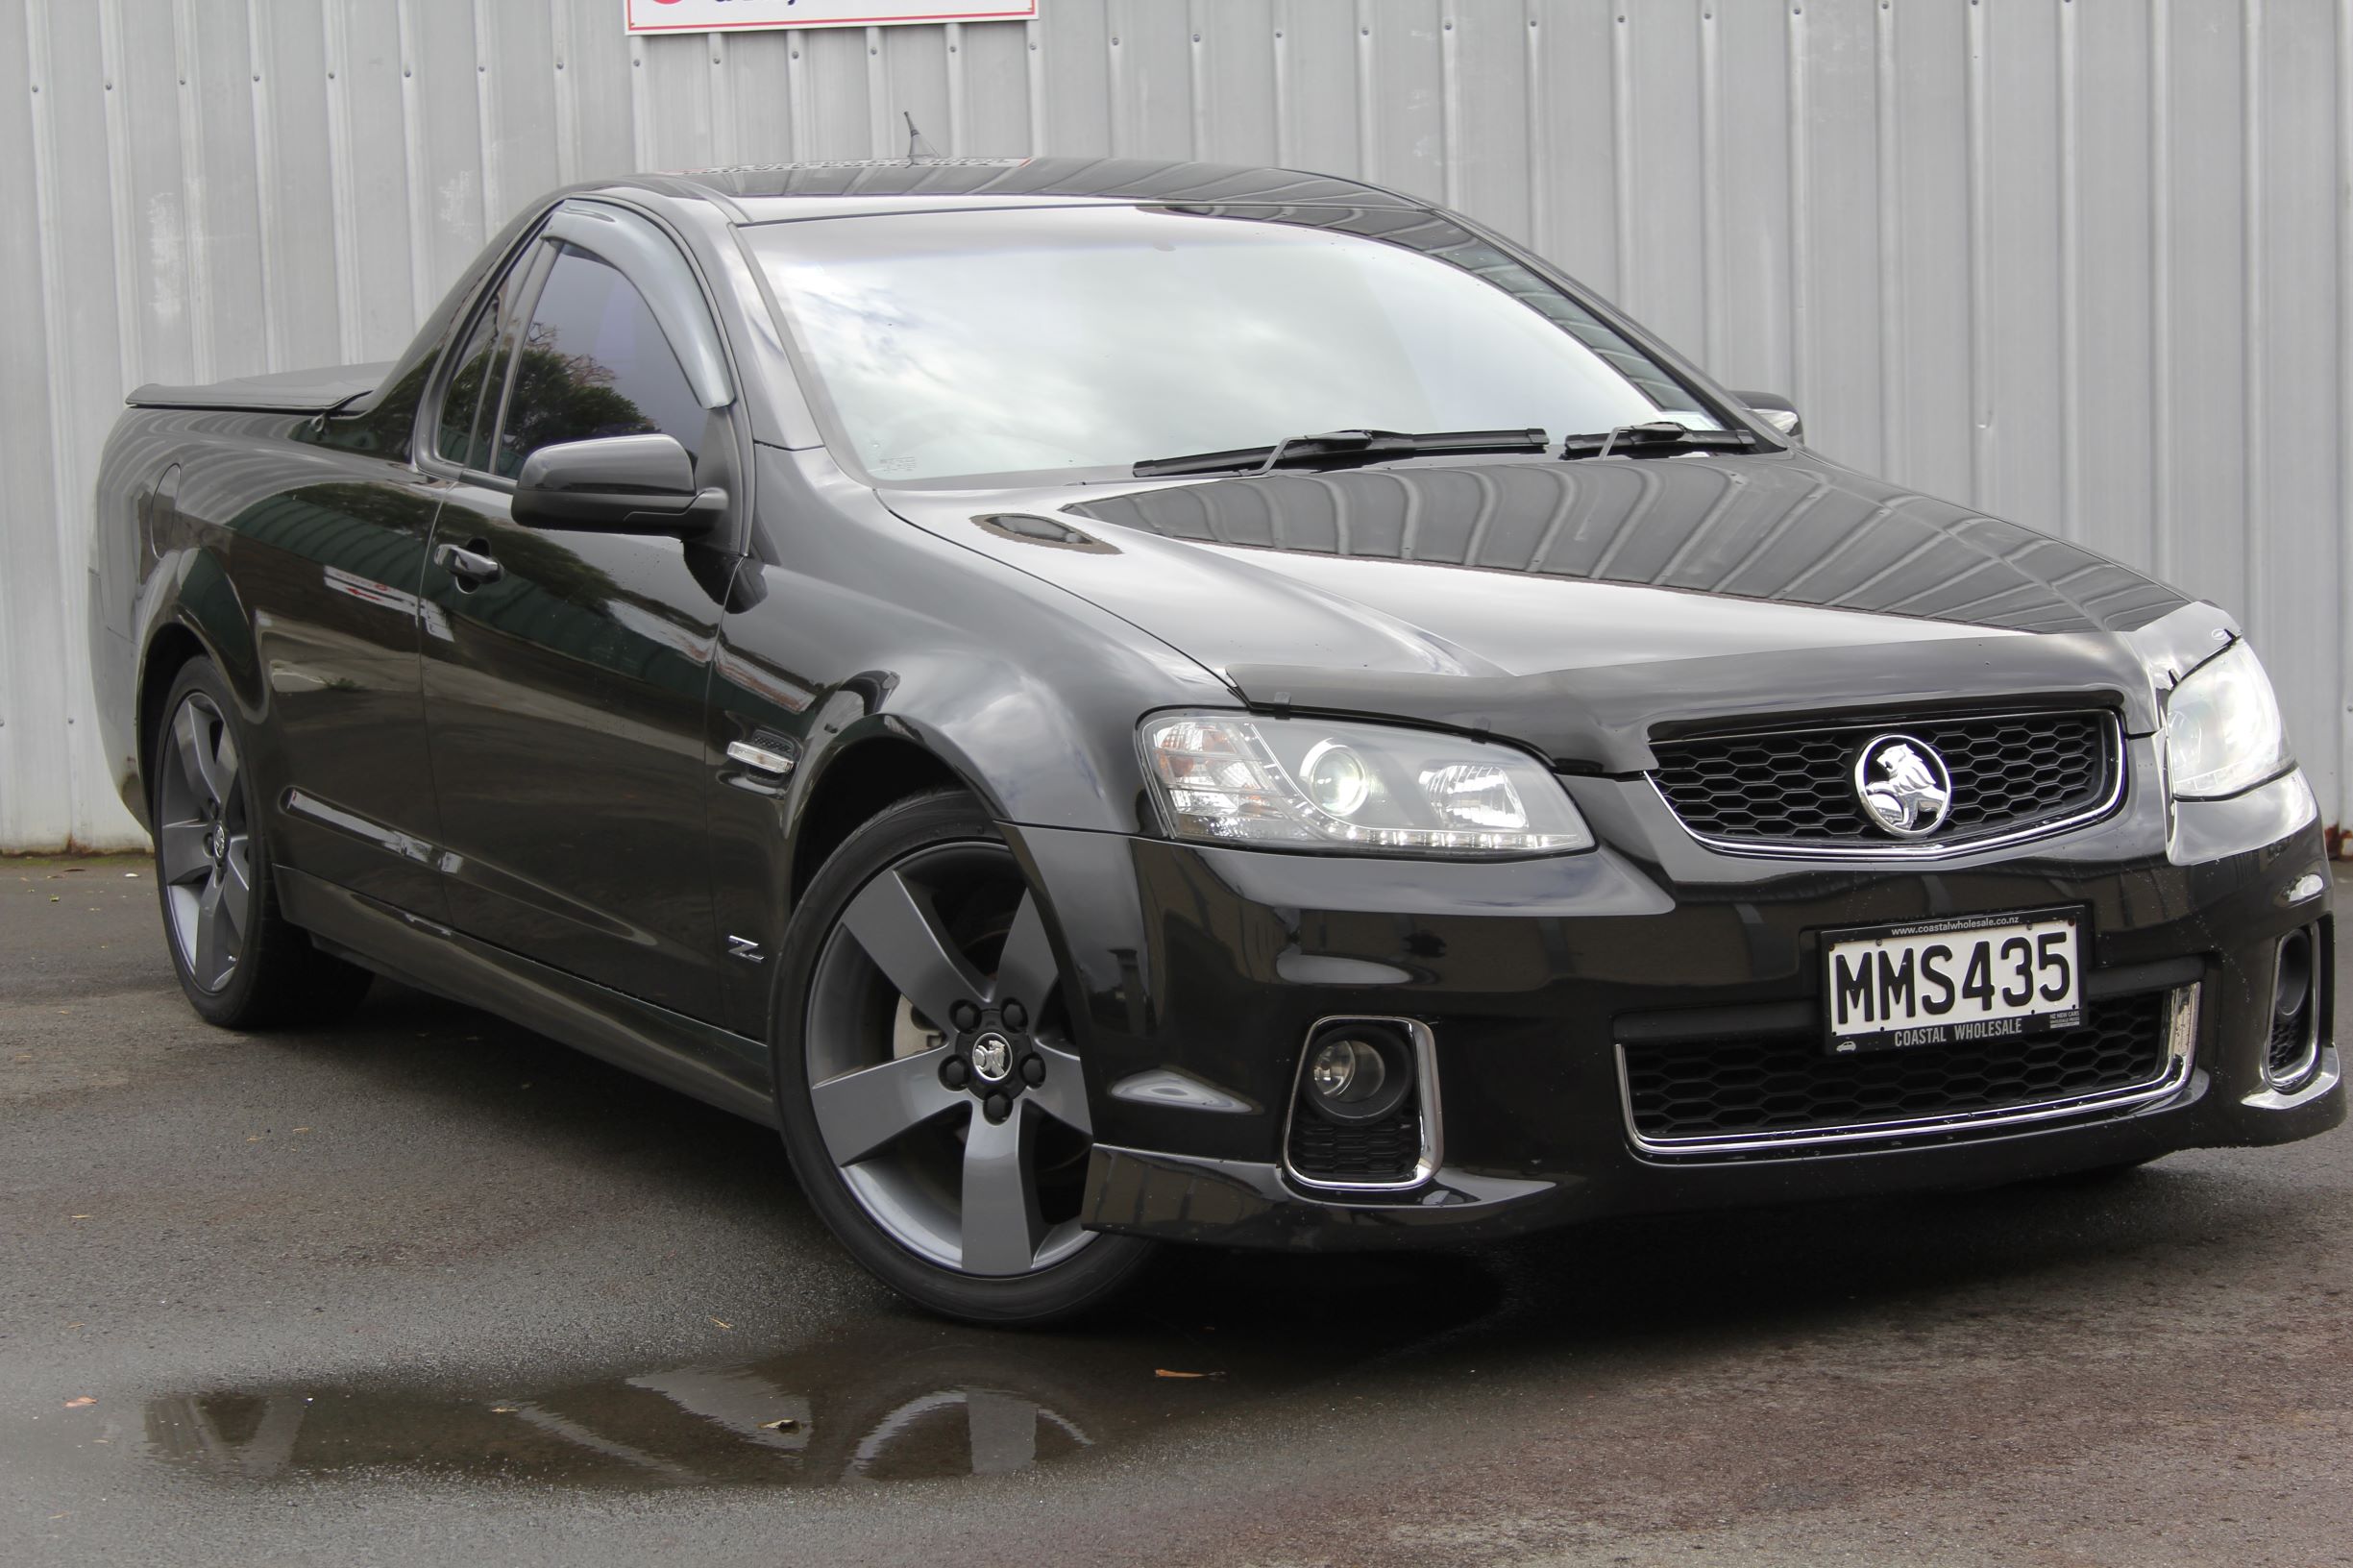 Holden Commodore Z series 2012 for sale in Auckland